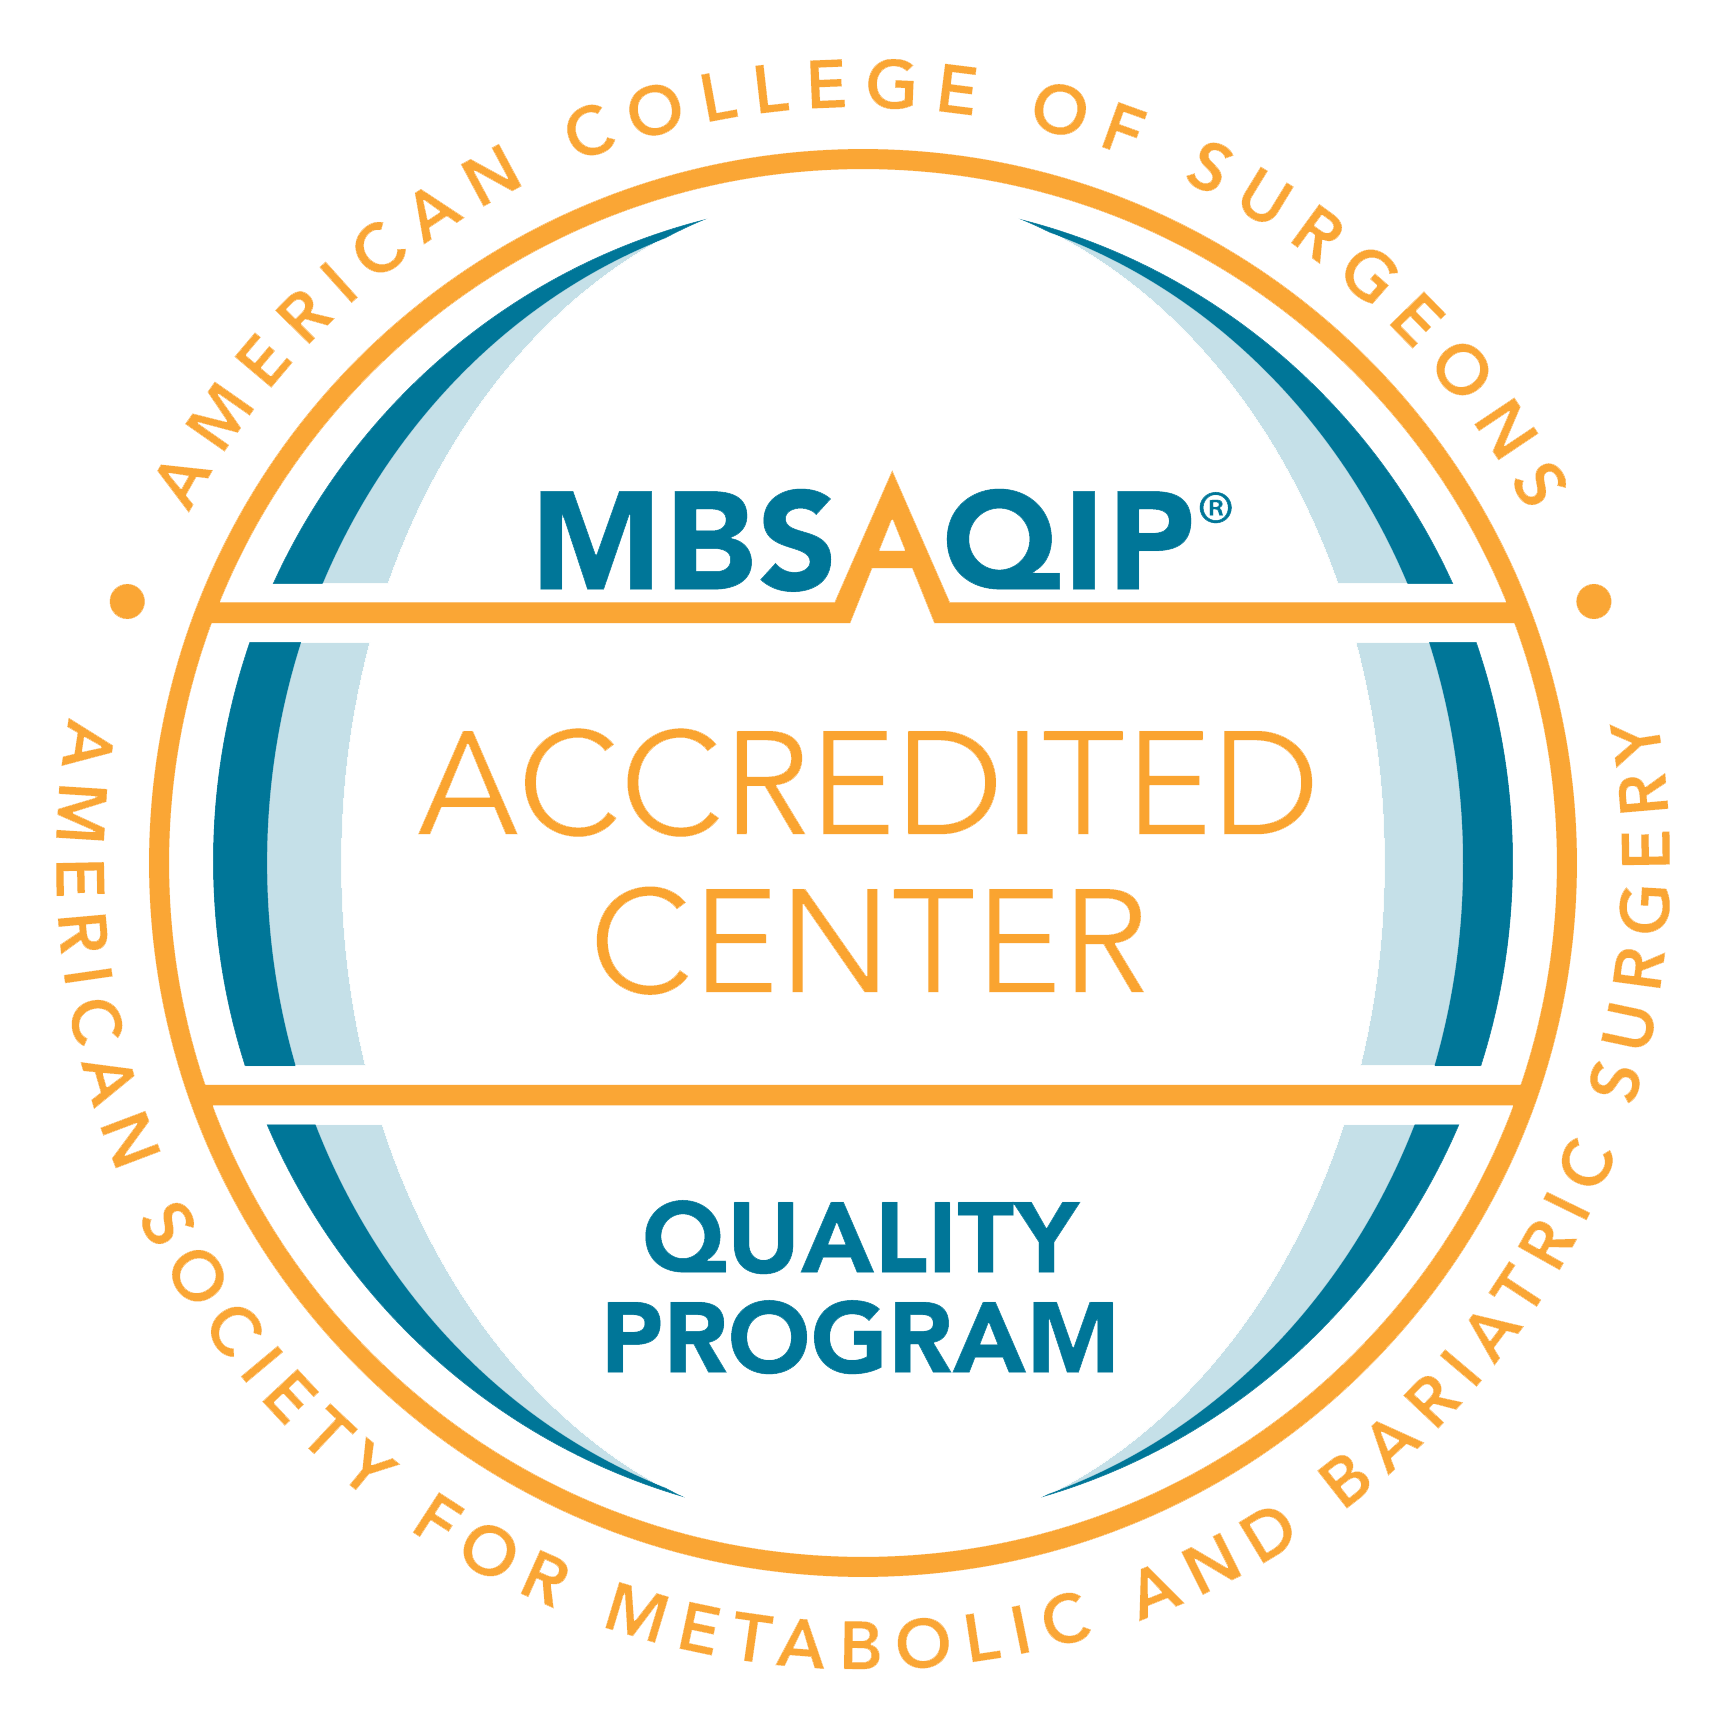 MBSAQIP Accredited Center 